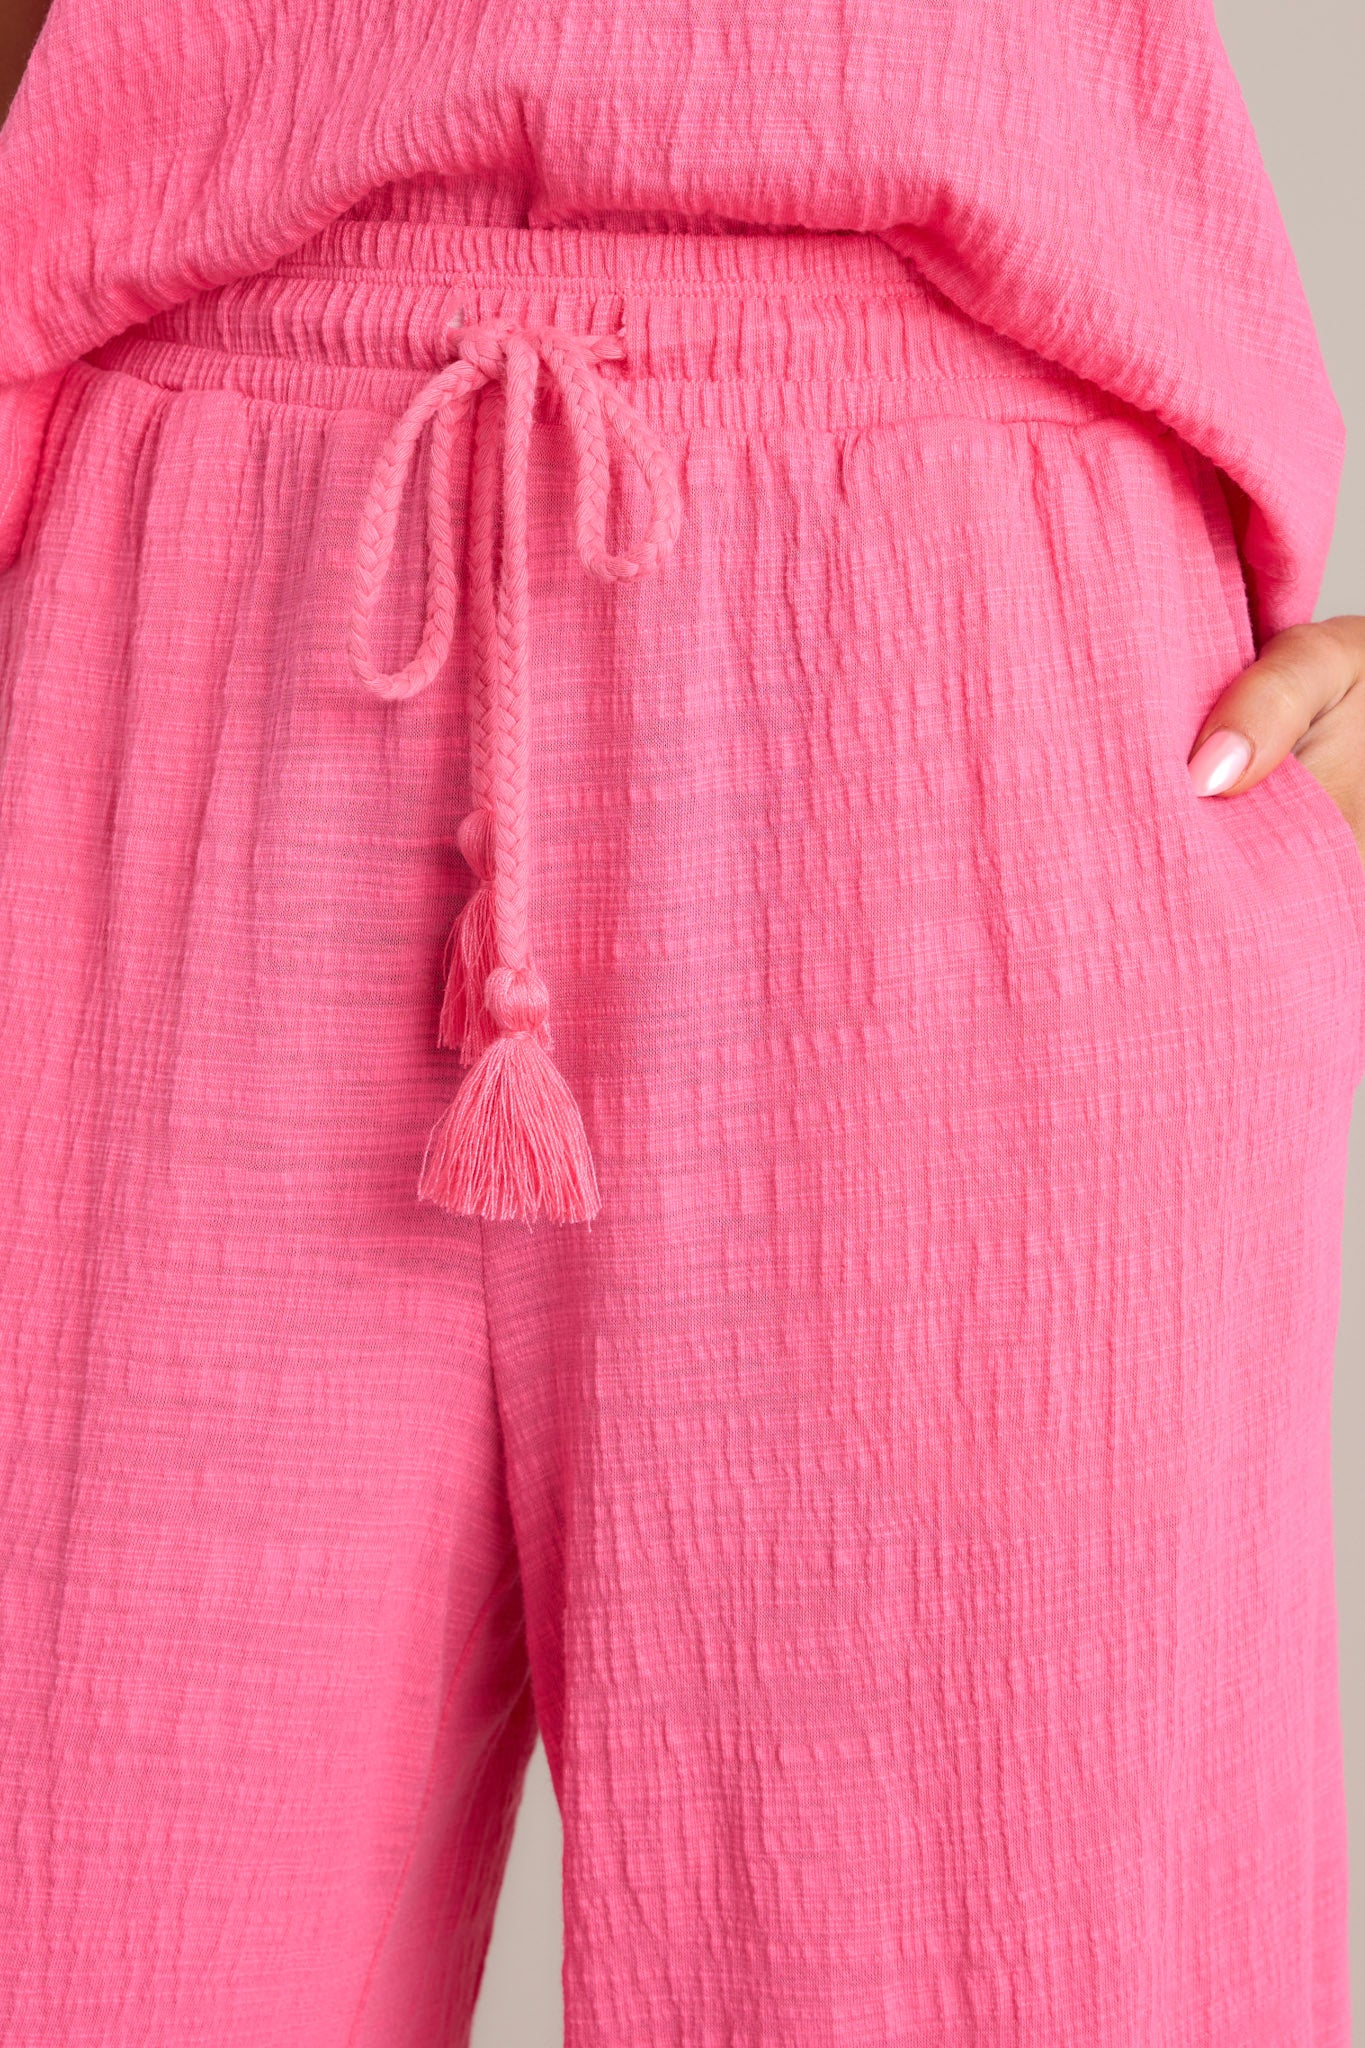 Detailed close-up of the pink pants' textured material and self-tie drawstring.